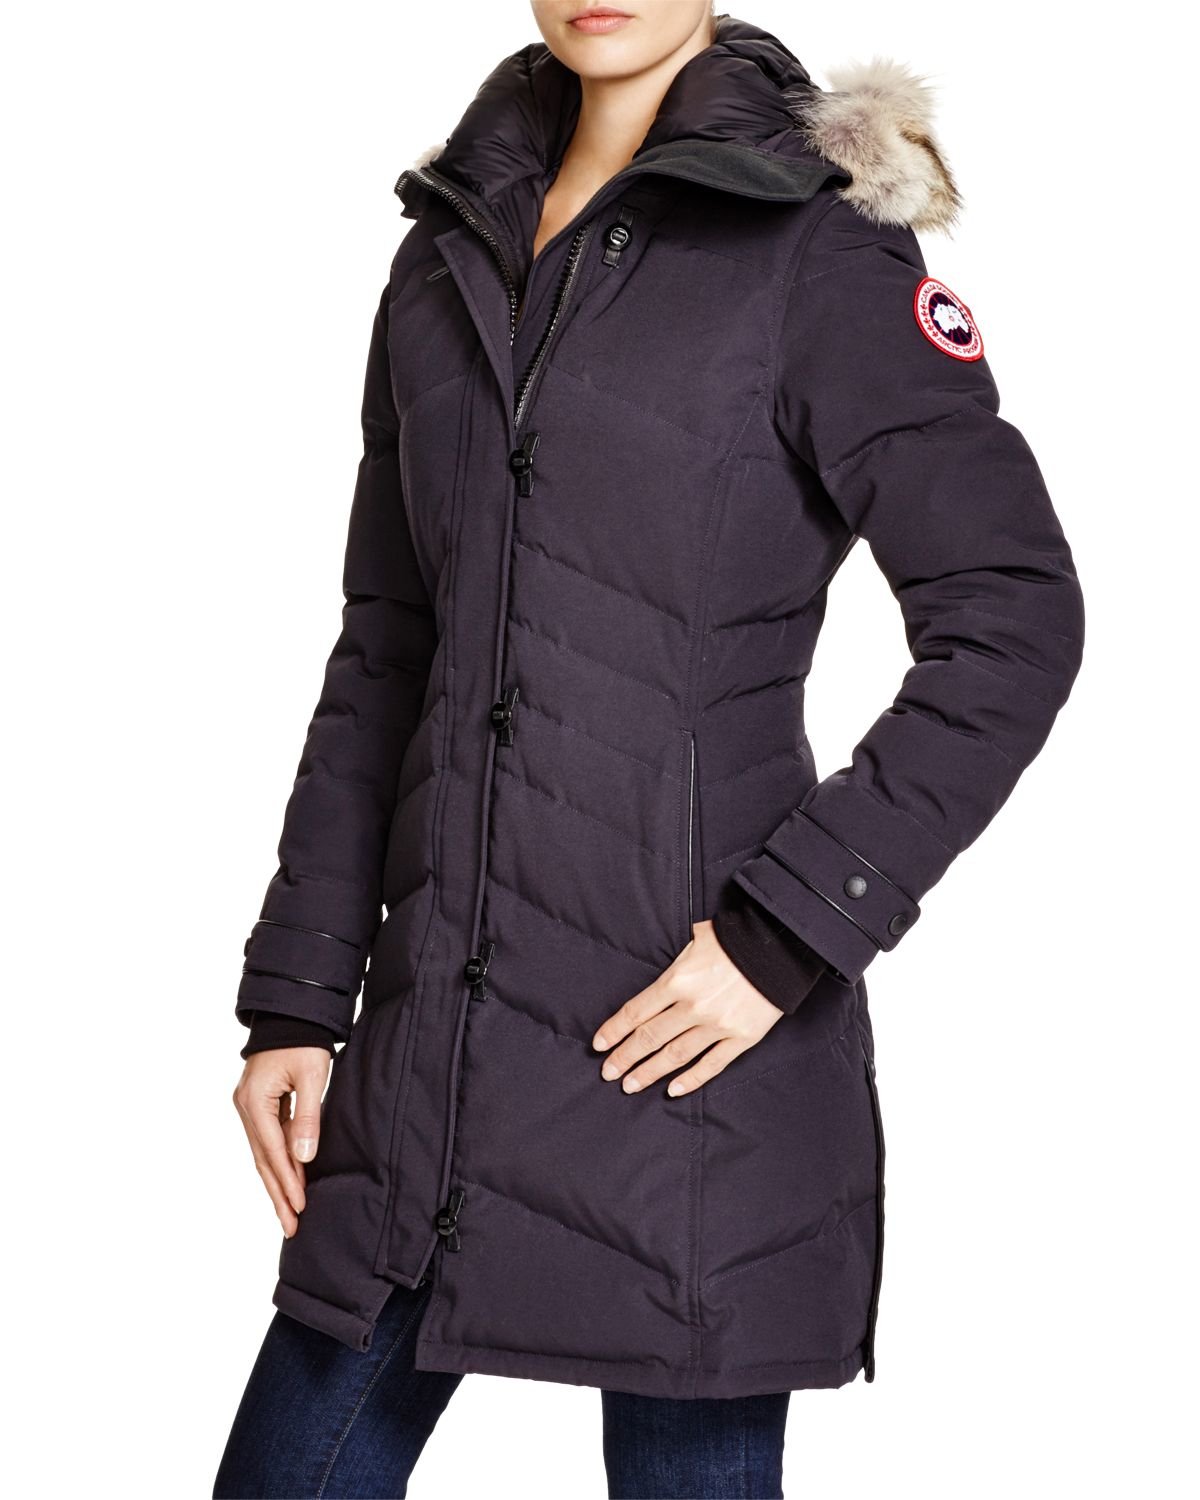 Canada Goose coats online 2016 - The Best Canada Goose Vs Swan Secure Shopping Online